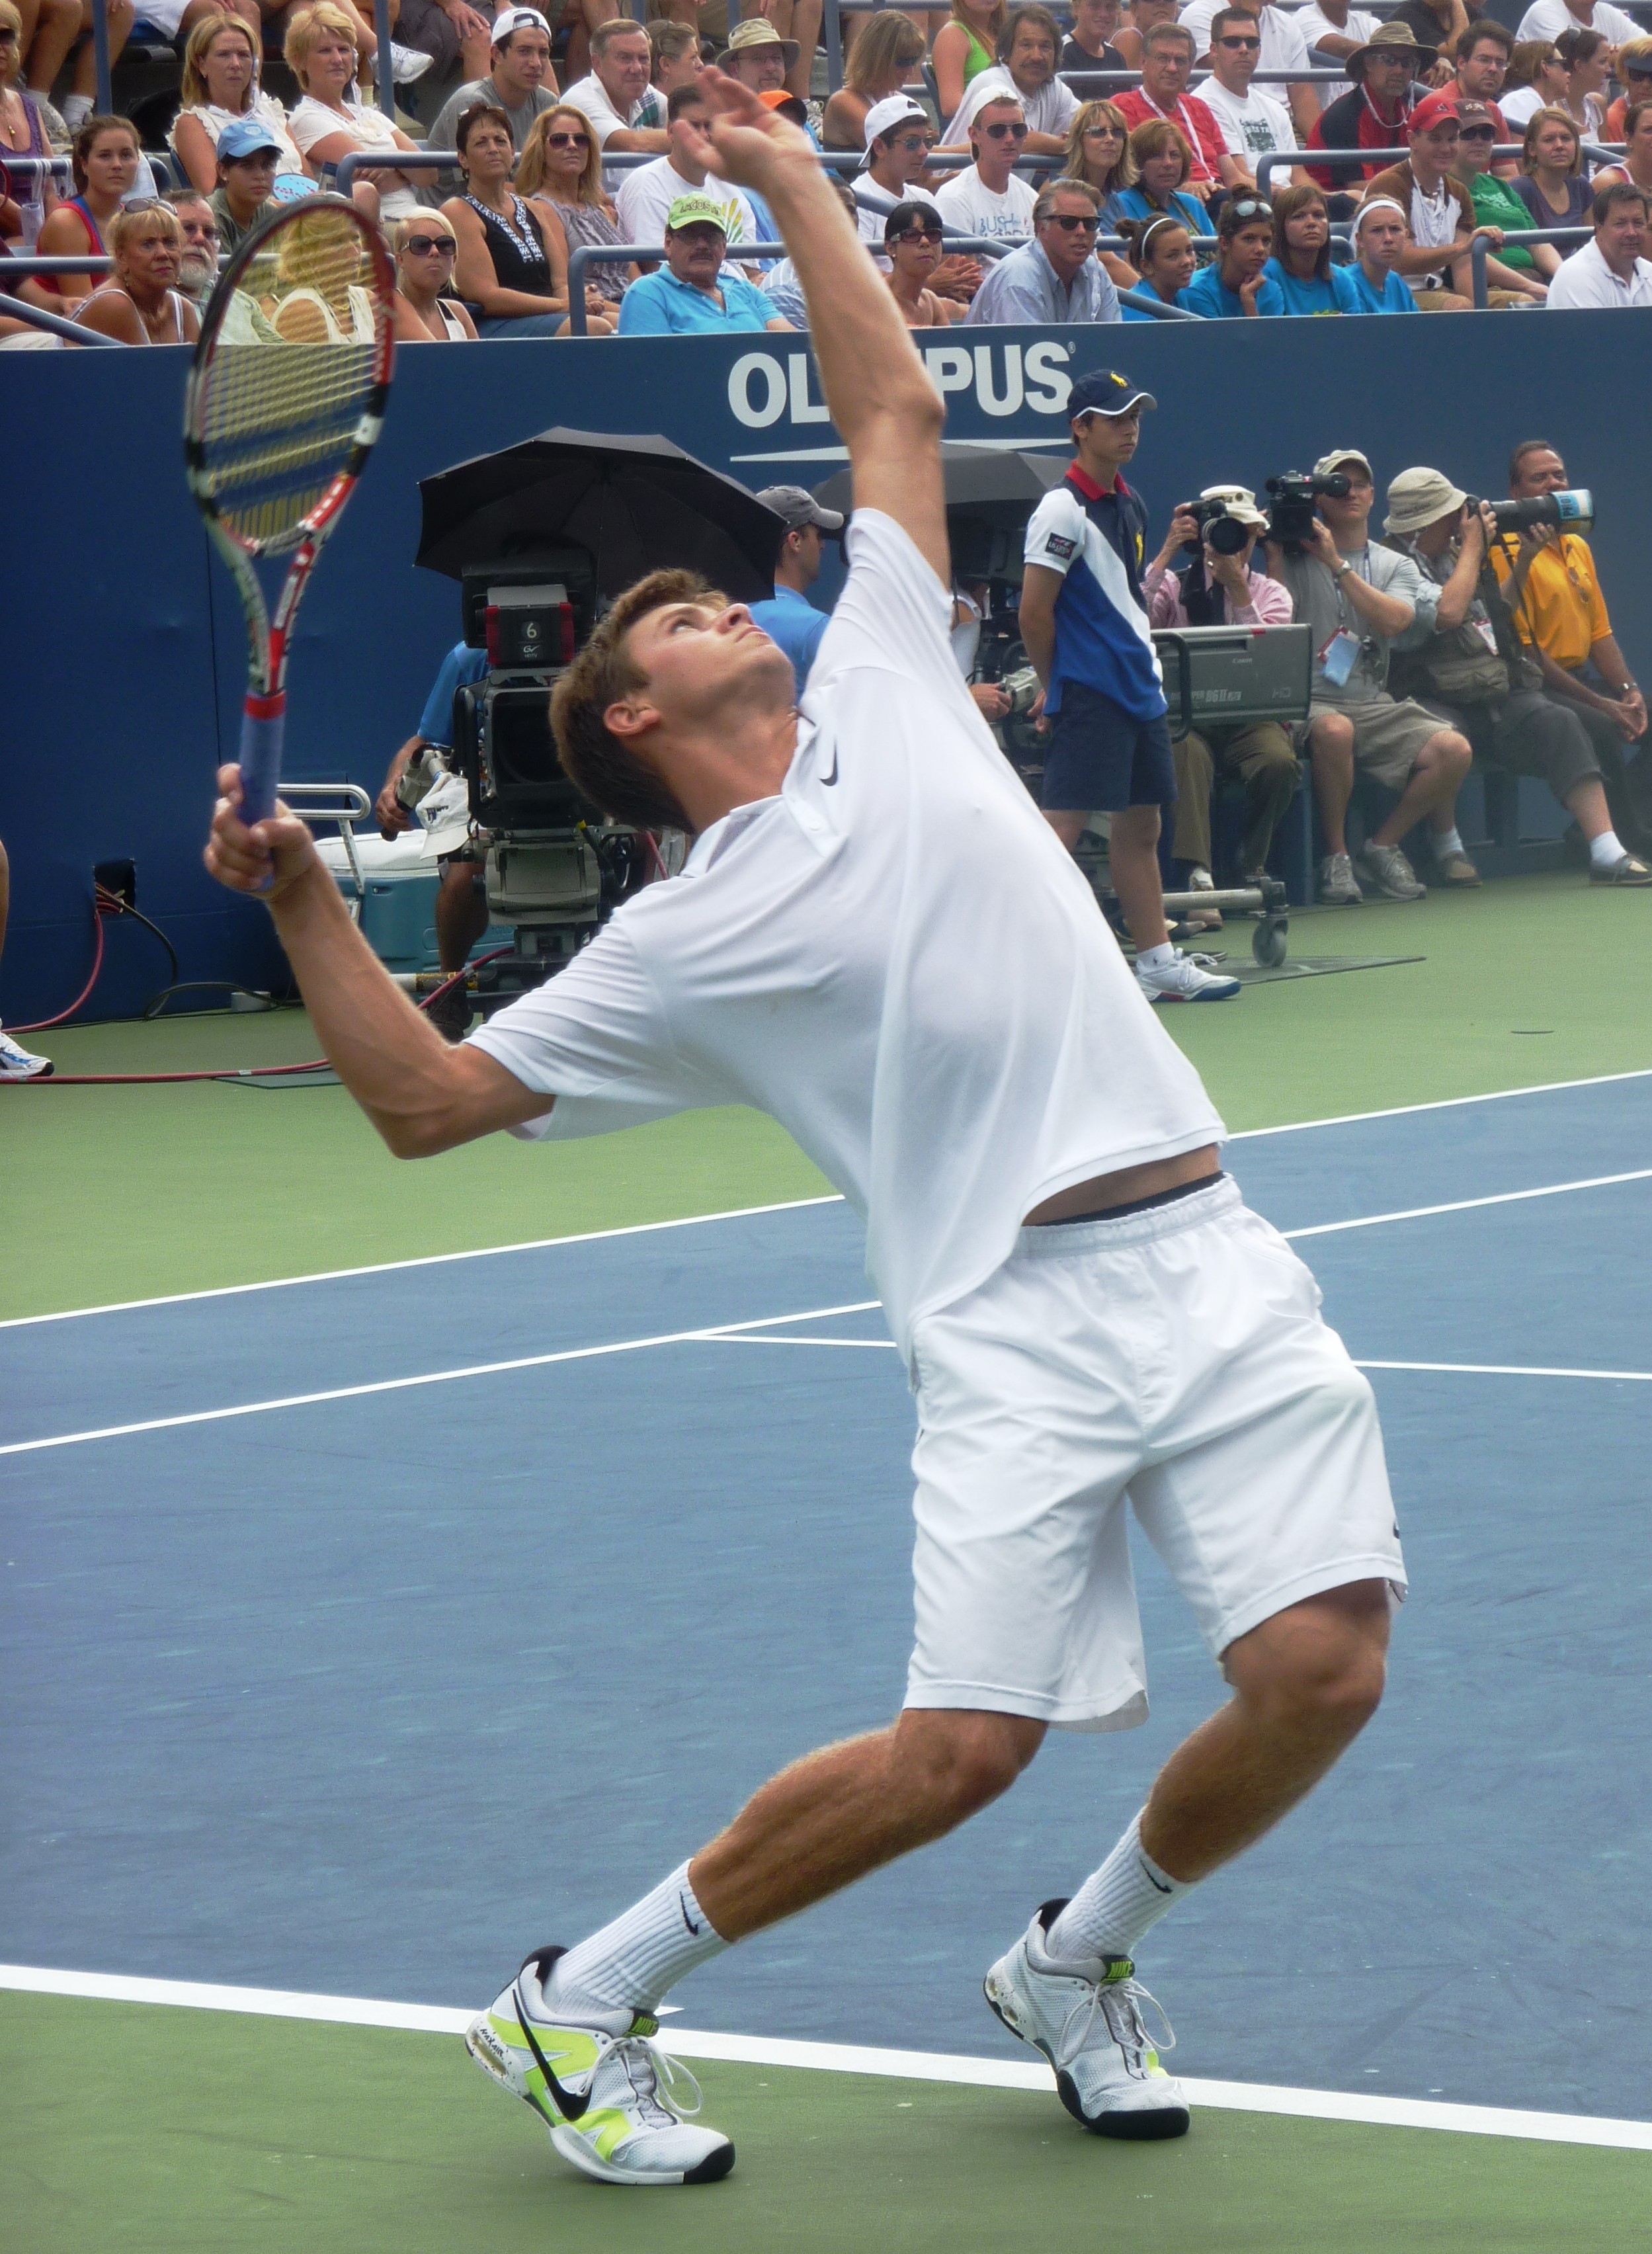 Harrison in action at the U.S. Open